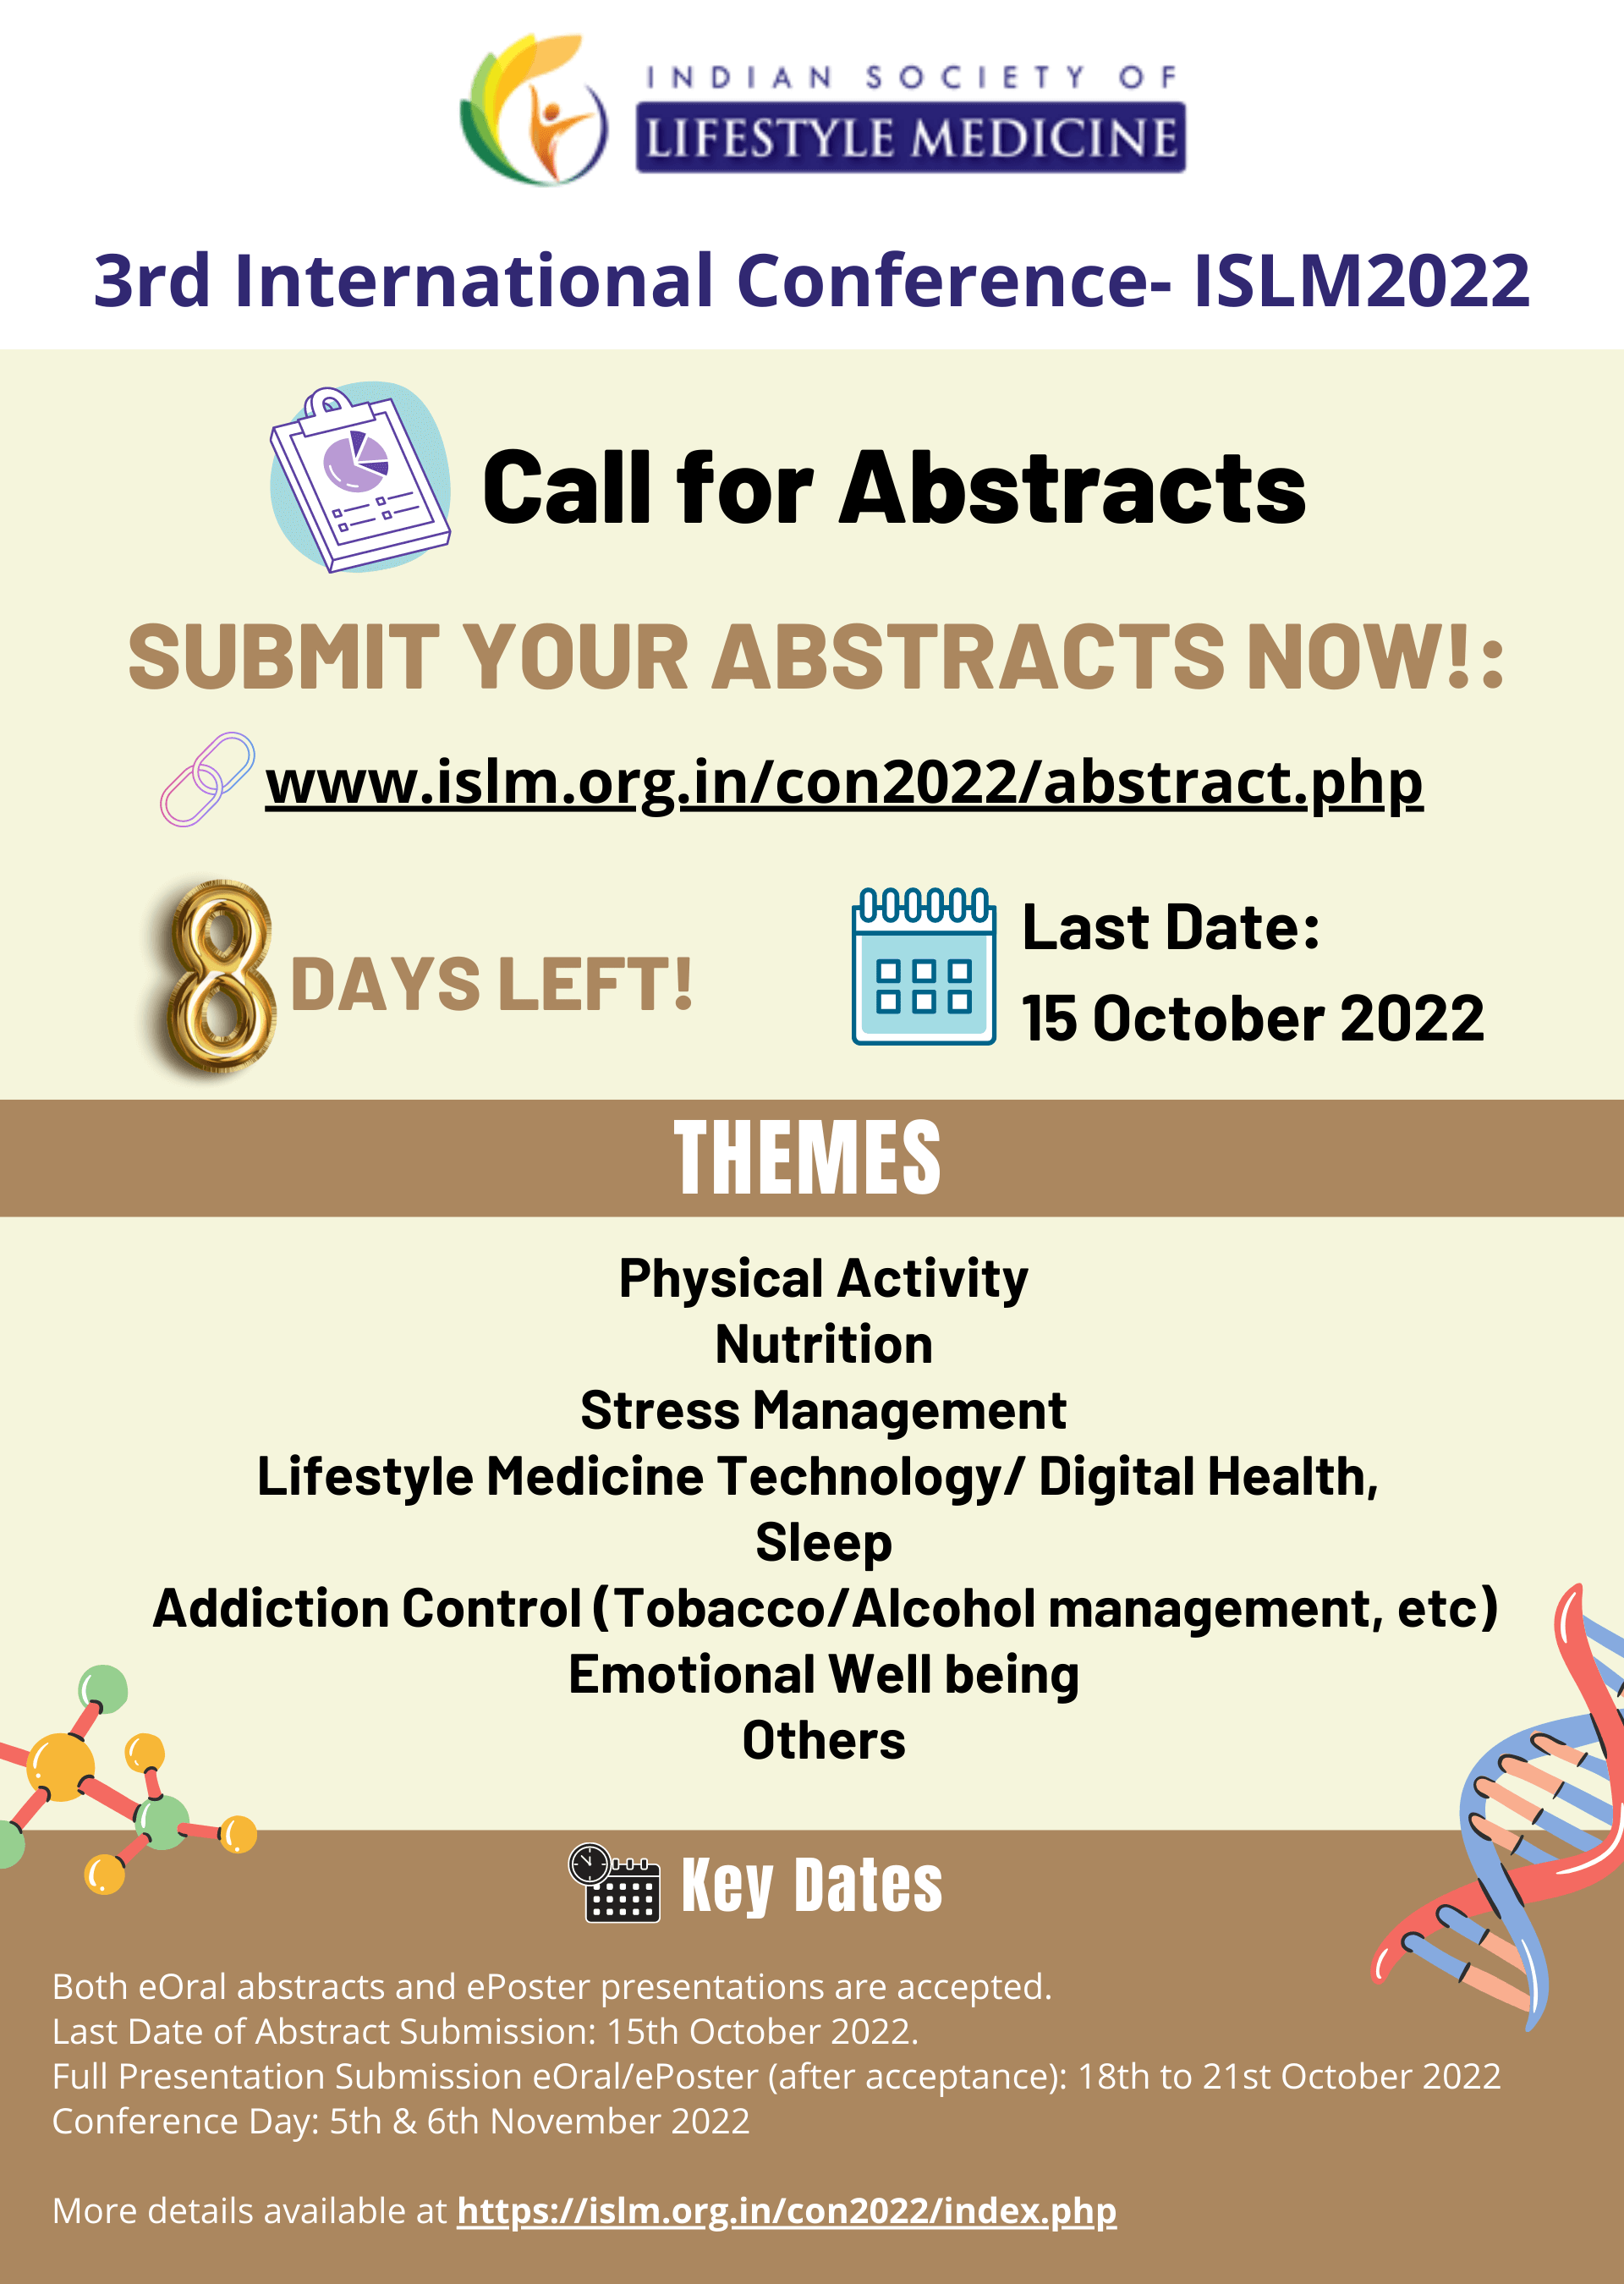 Call for Abstract 3rd International Conference ISLM2022